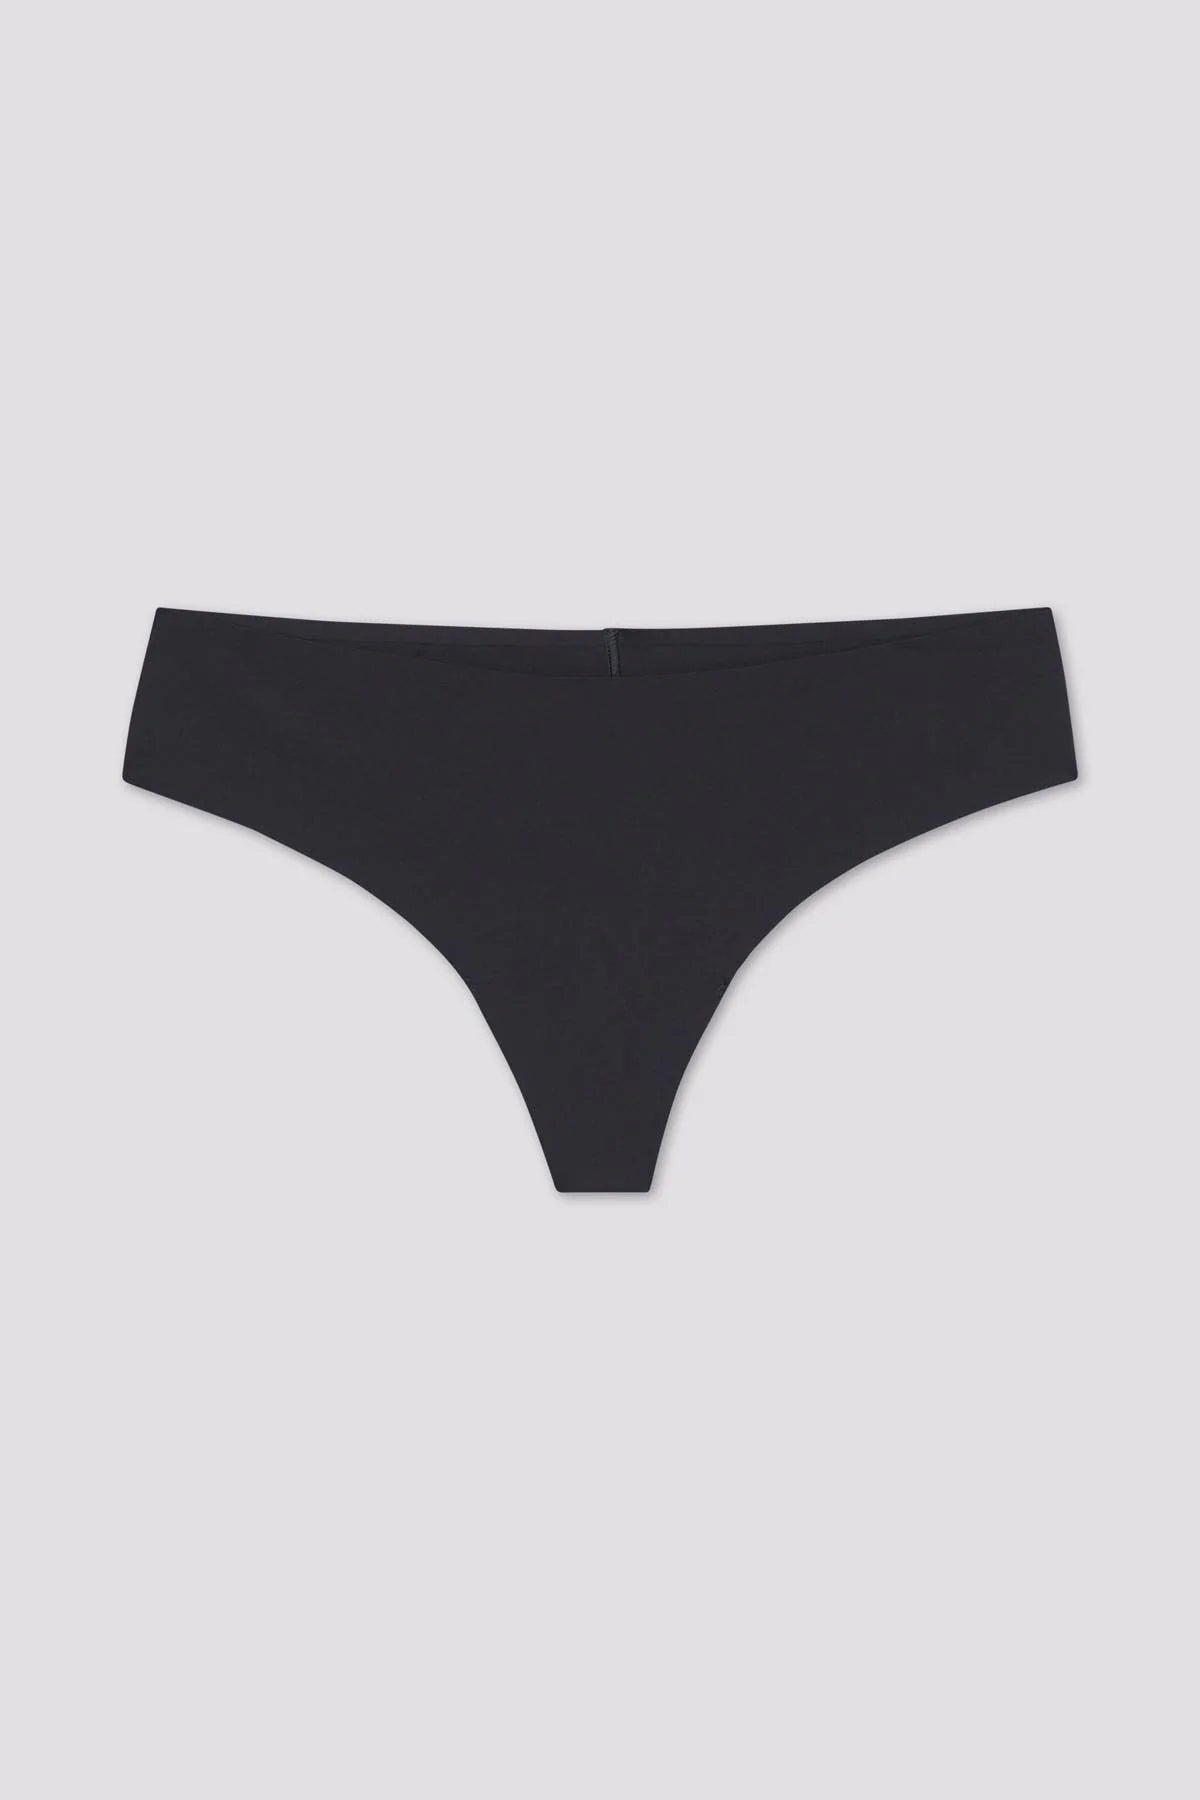 Girlfriend Collective Sport Thong in Raven